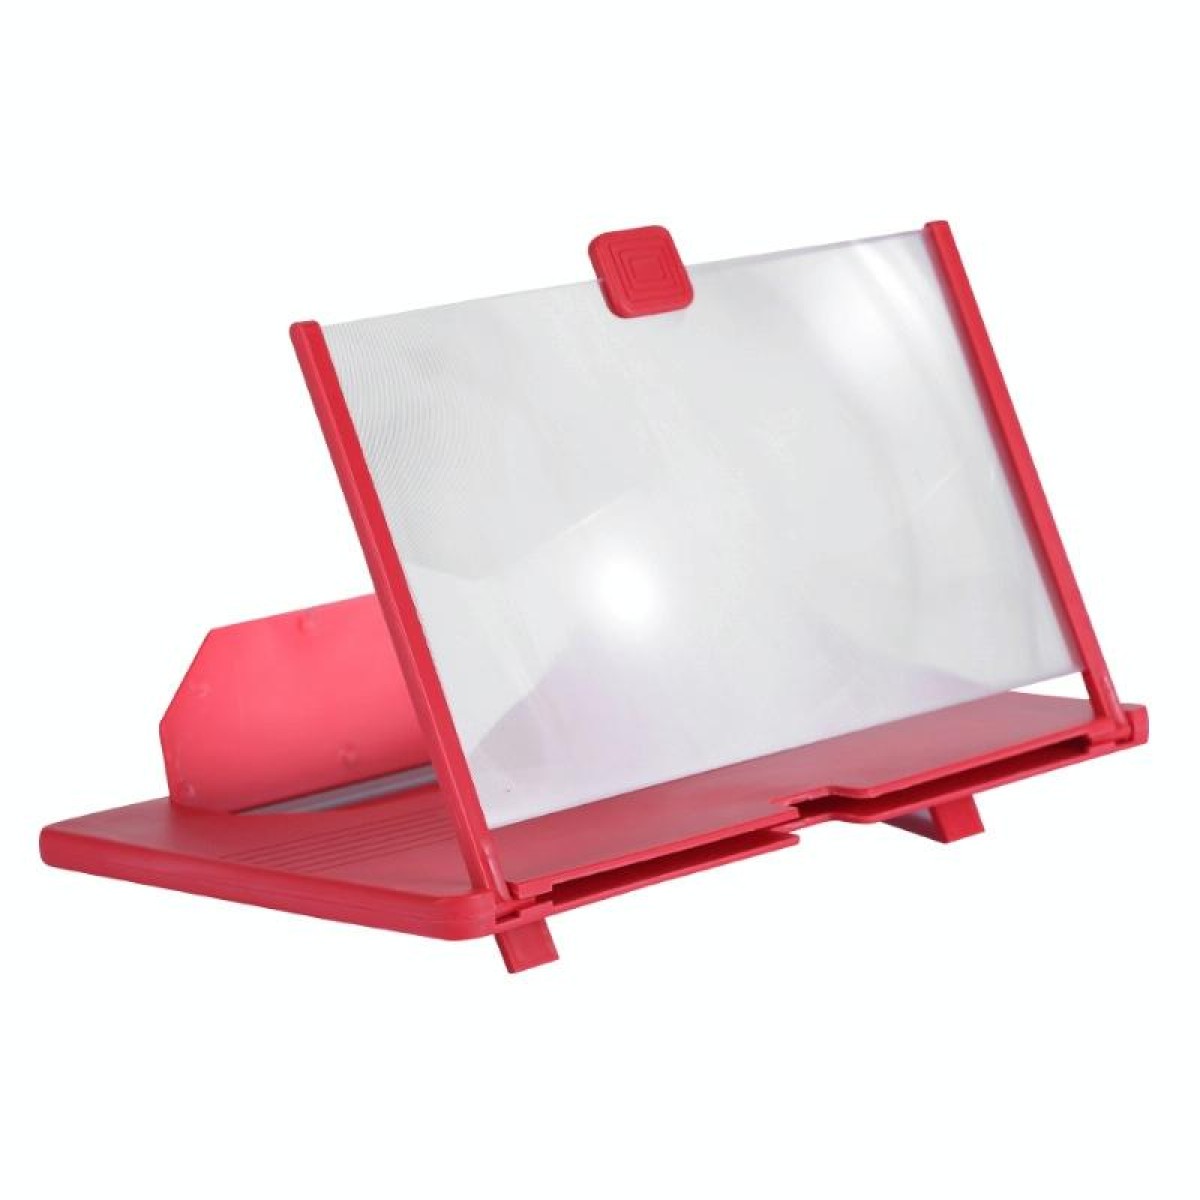 12 Inch Pull-Out Mobile Phone Screen Magnifier 3D Desktop Stand, Style:Blu-ray Model(Red)